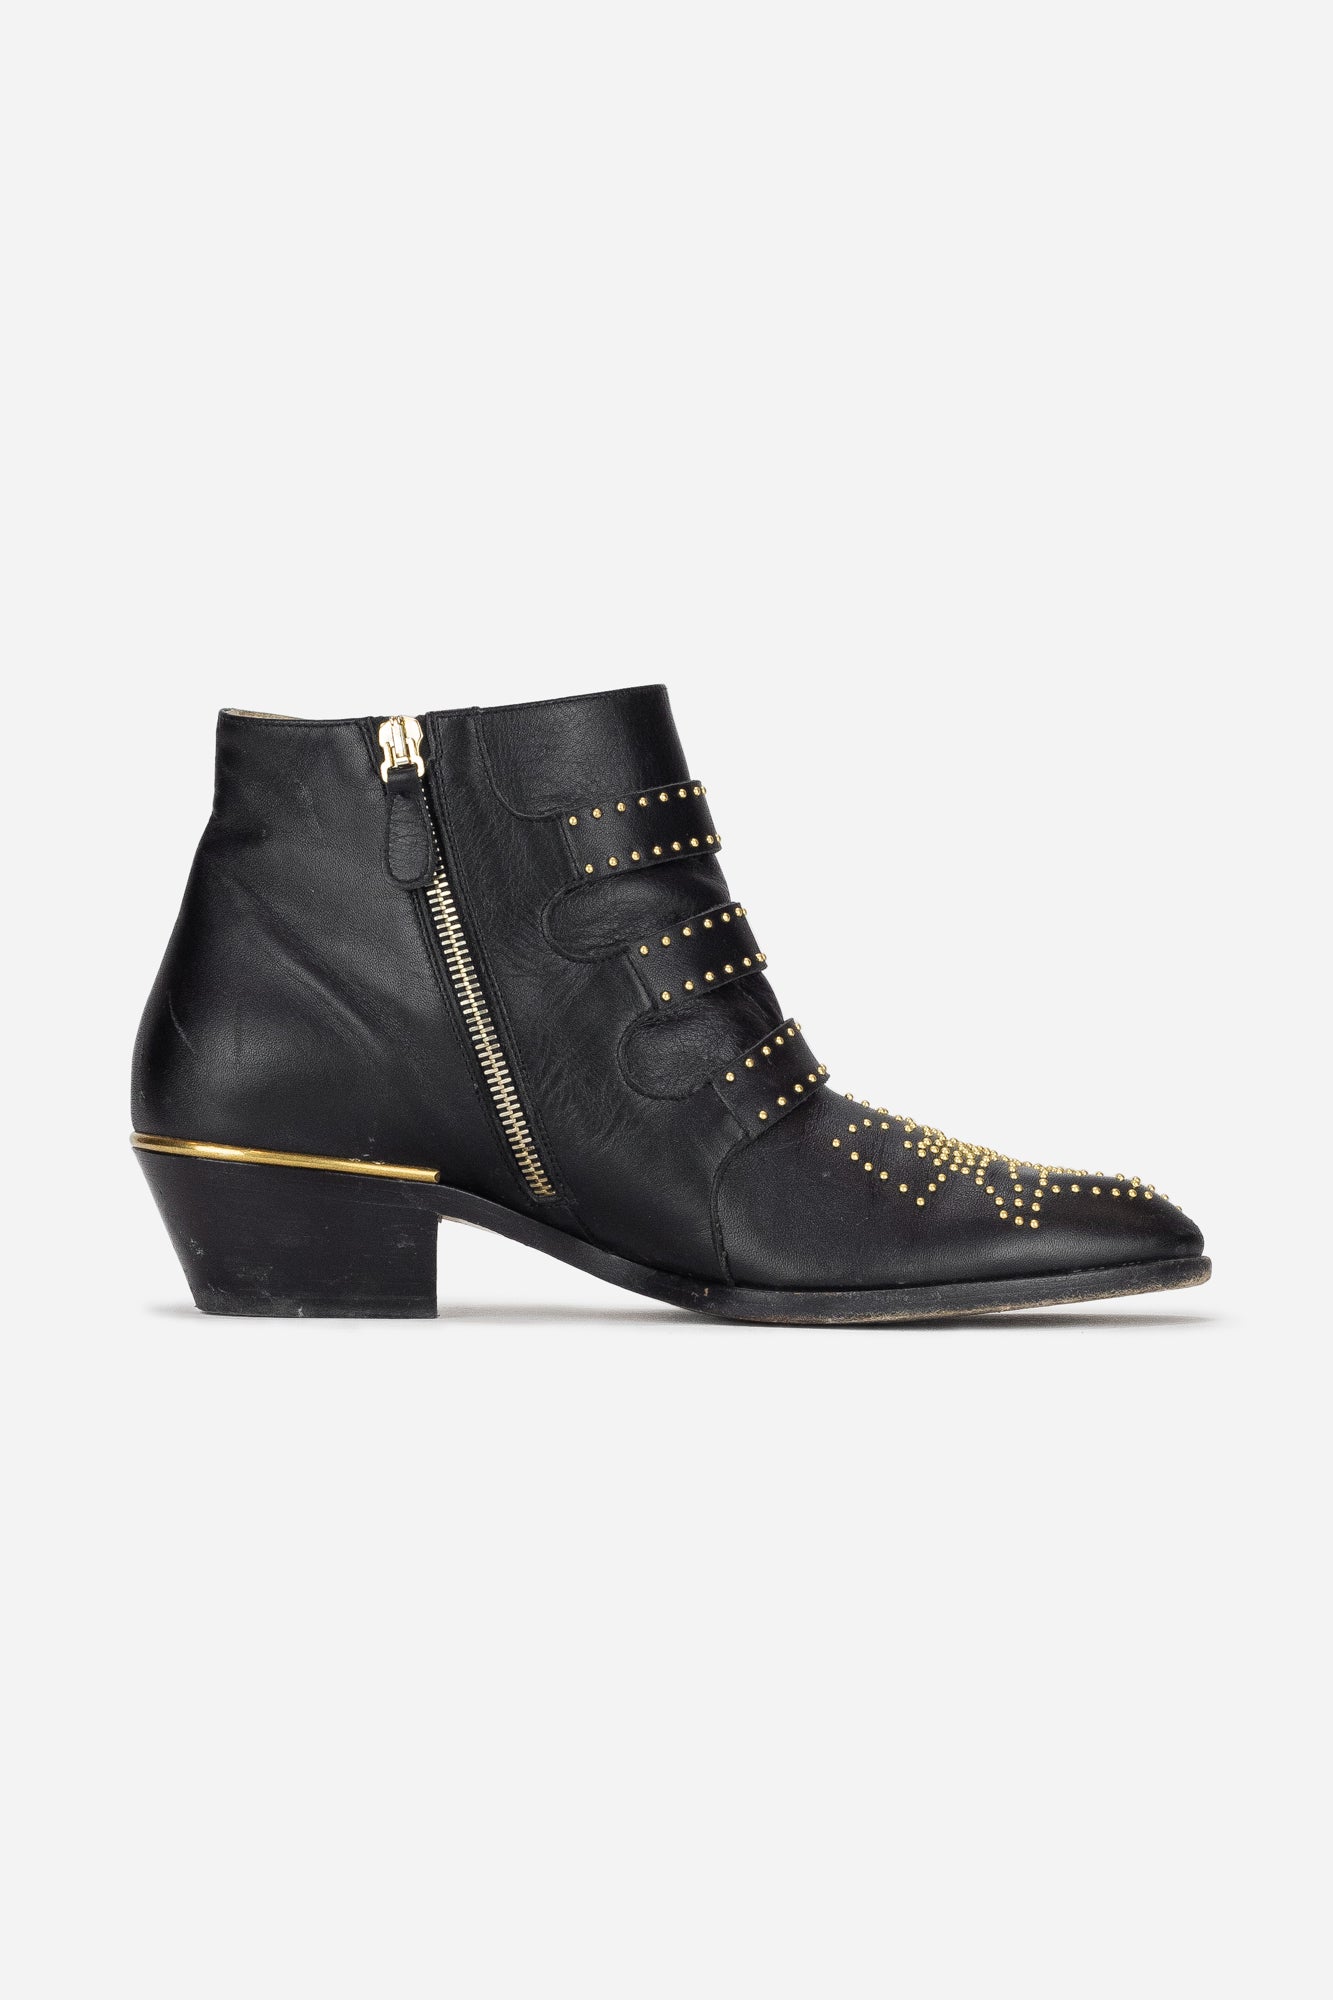 Black Leather Susanna Ankle Boots - So Over It Luxury Consignment